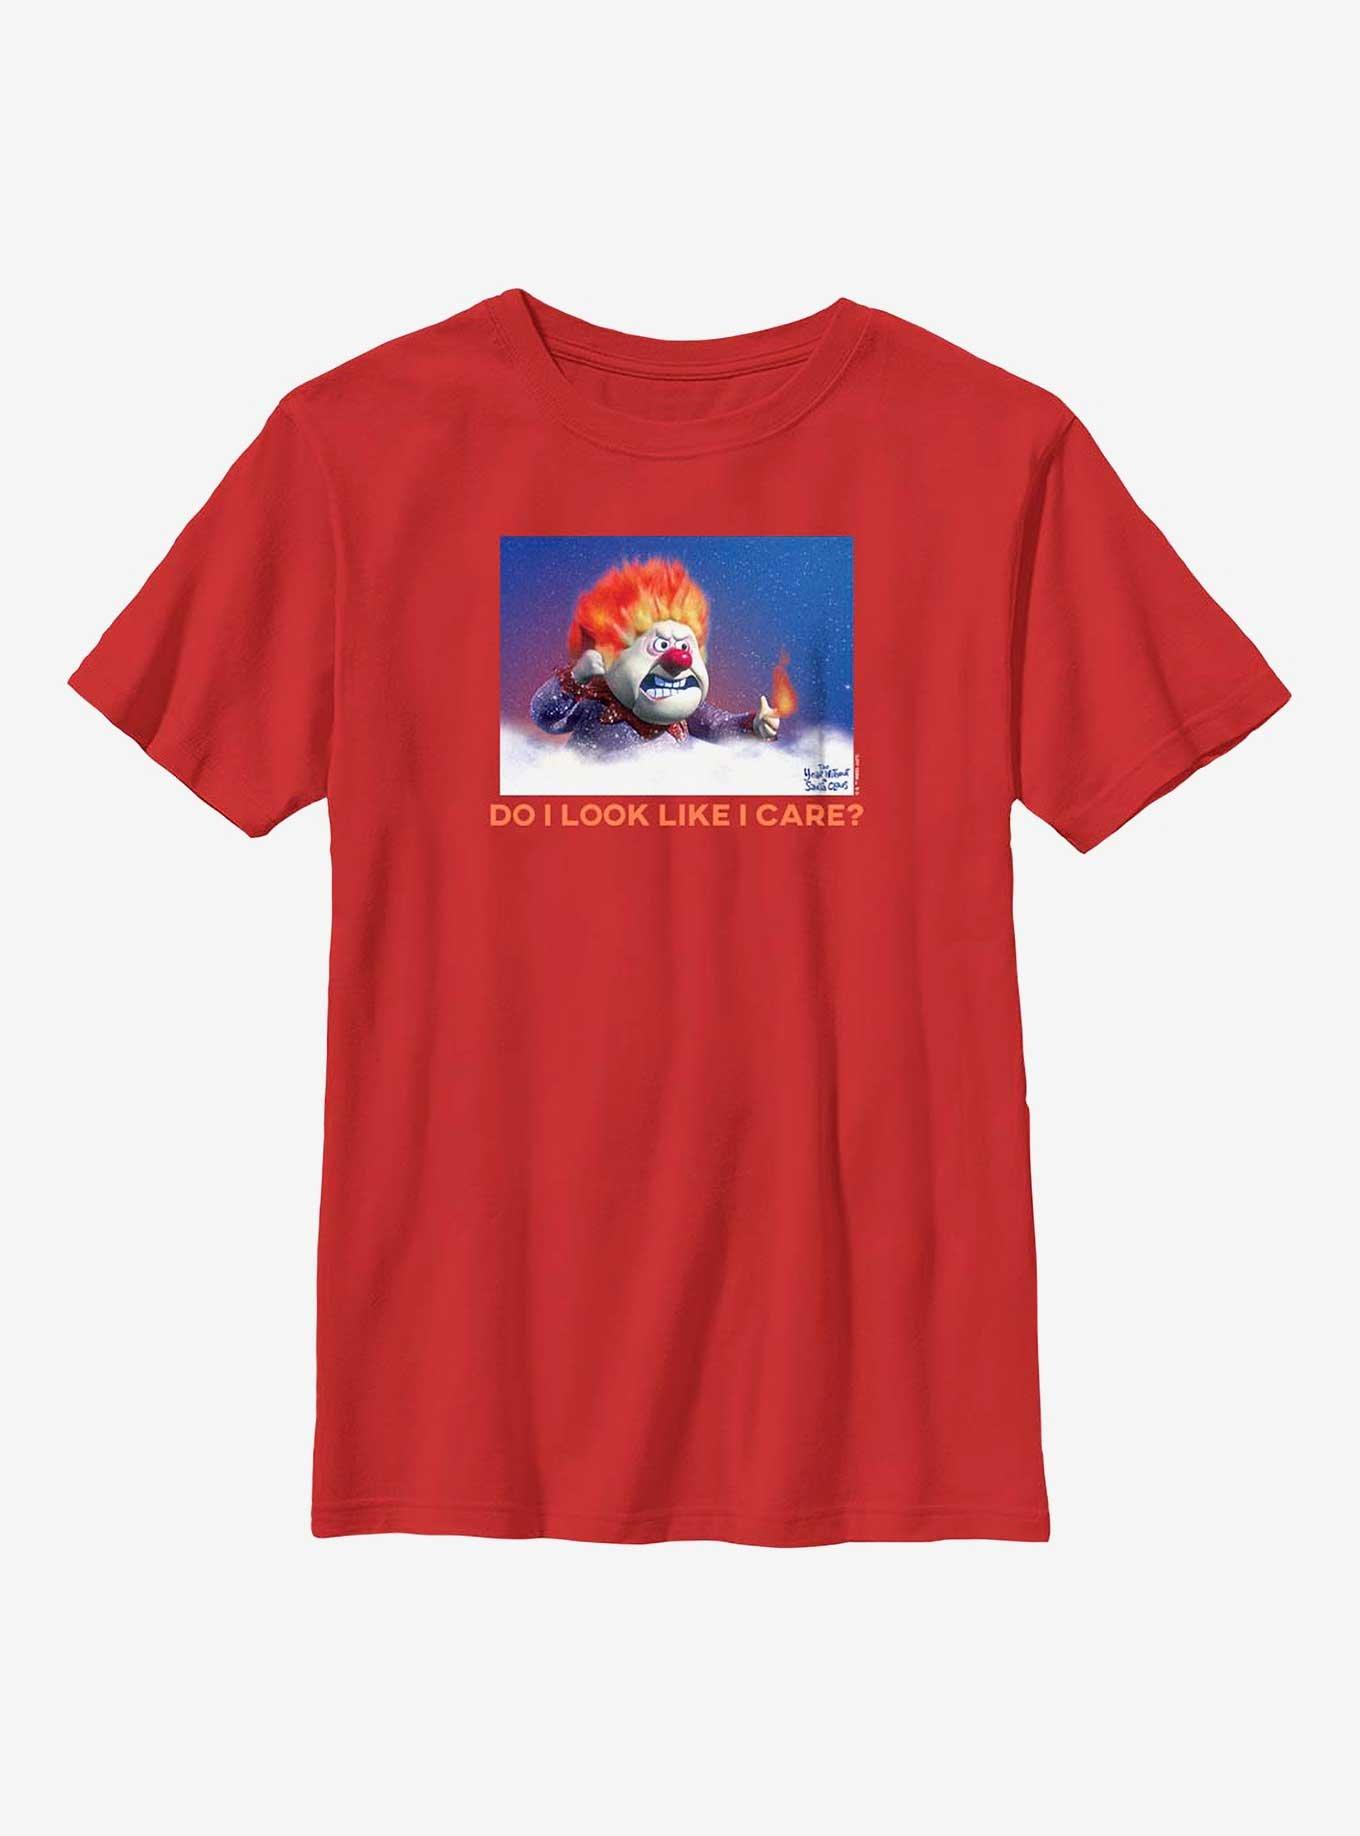 The Year Without Santa Claus Heat Miser Care? Youth T-Shirt, RED, hi-res